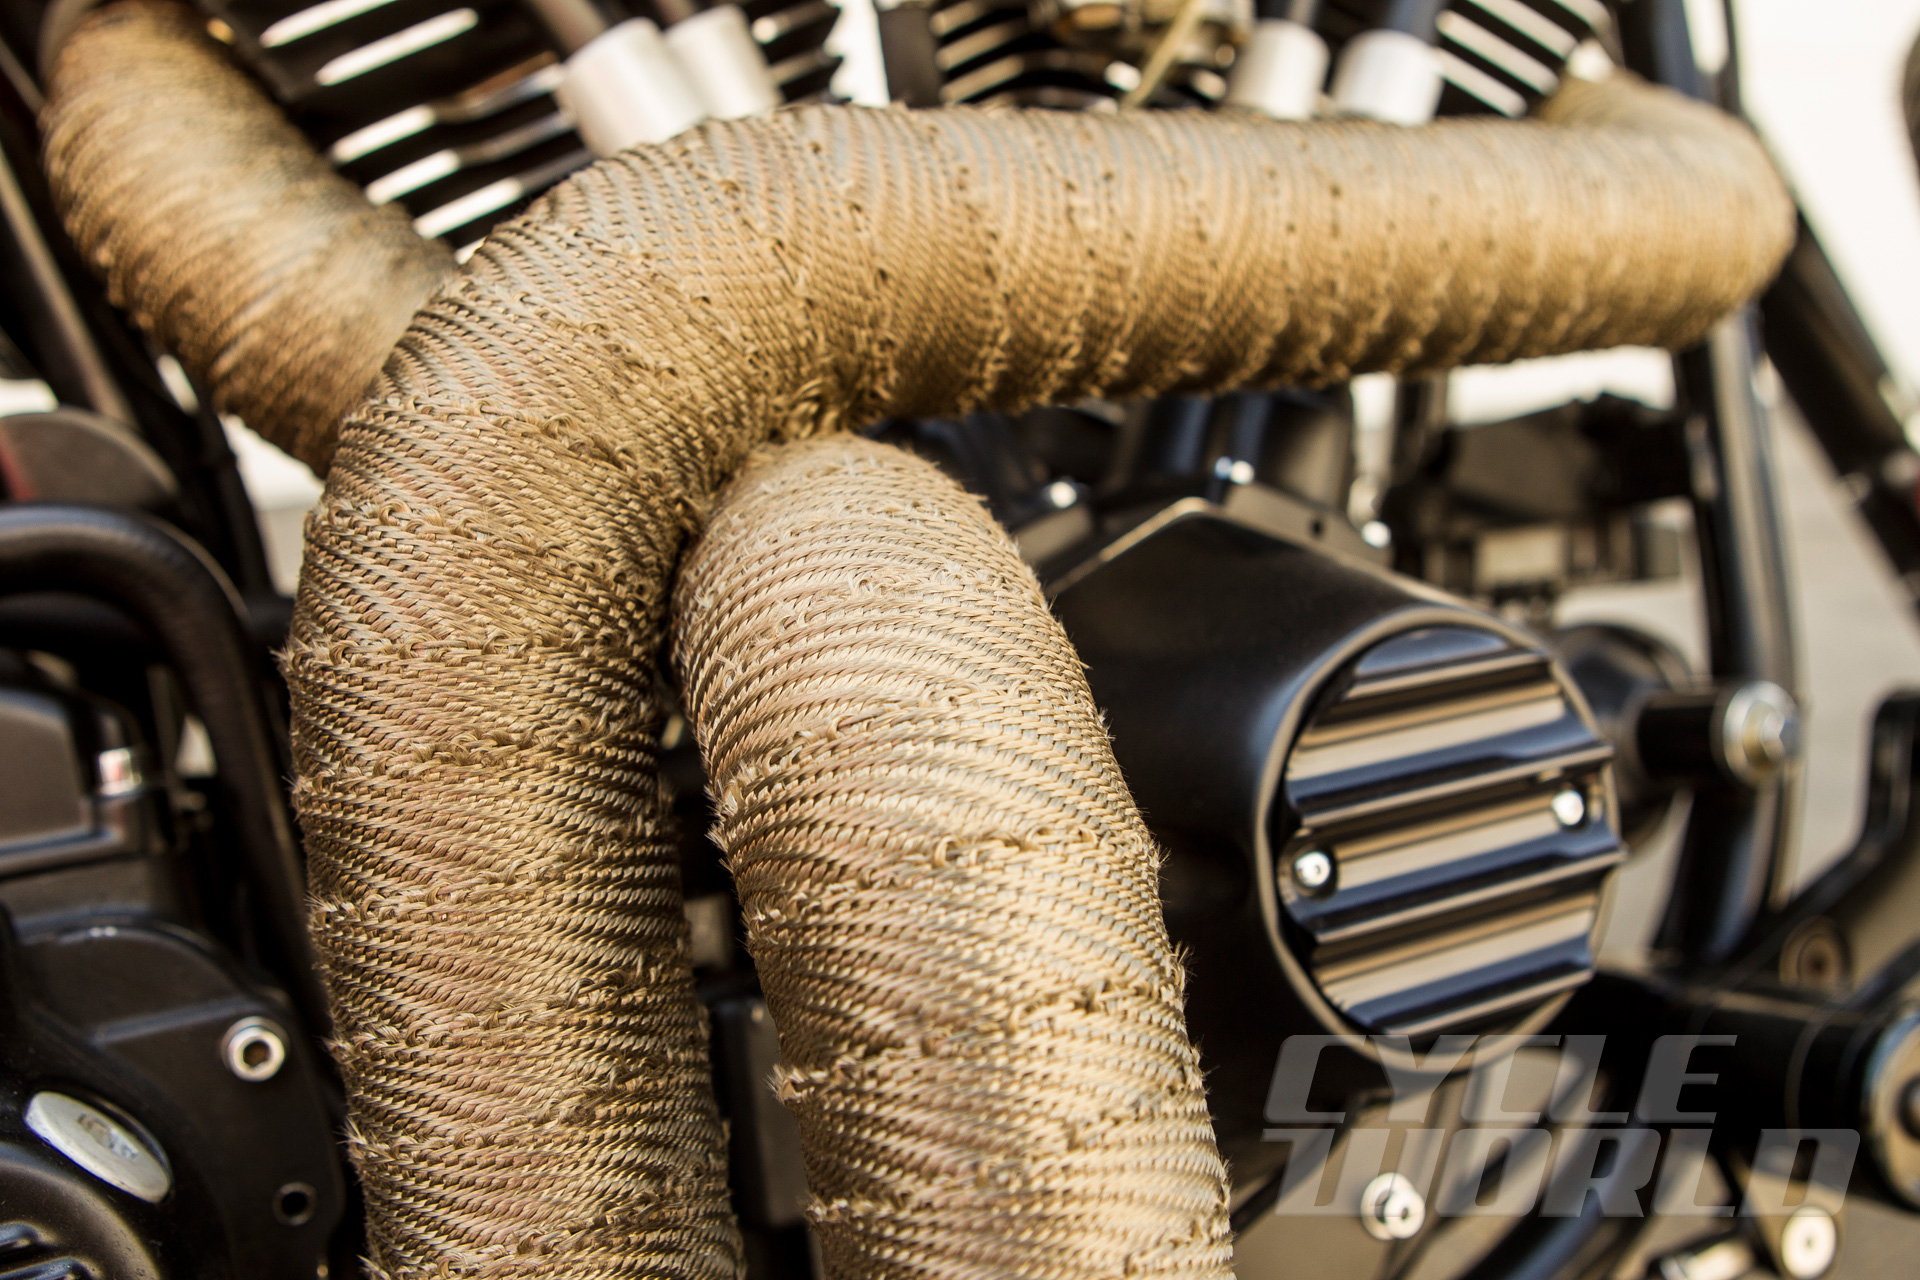 66 Feet x 2 Titanium Fiber Motorcycle Exhaust Header Wrap Tape Heat Protection Tape for Performance 